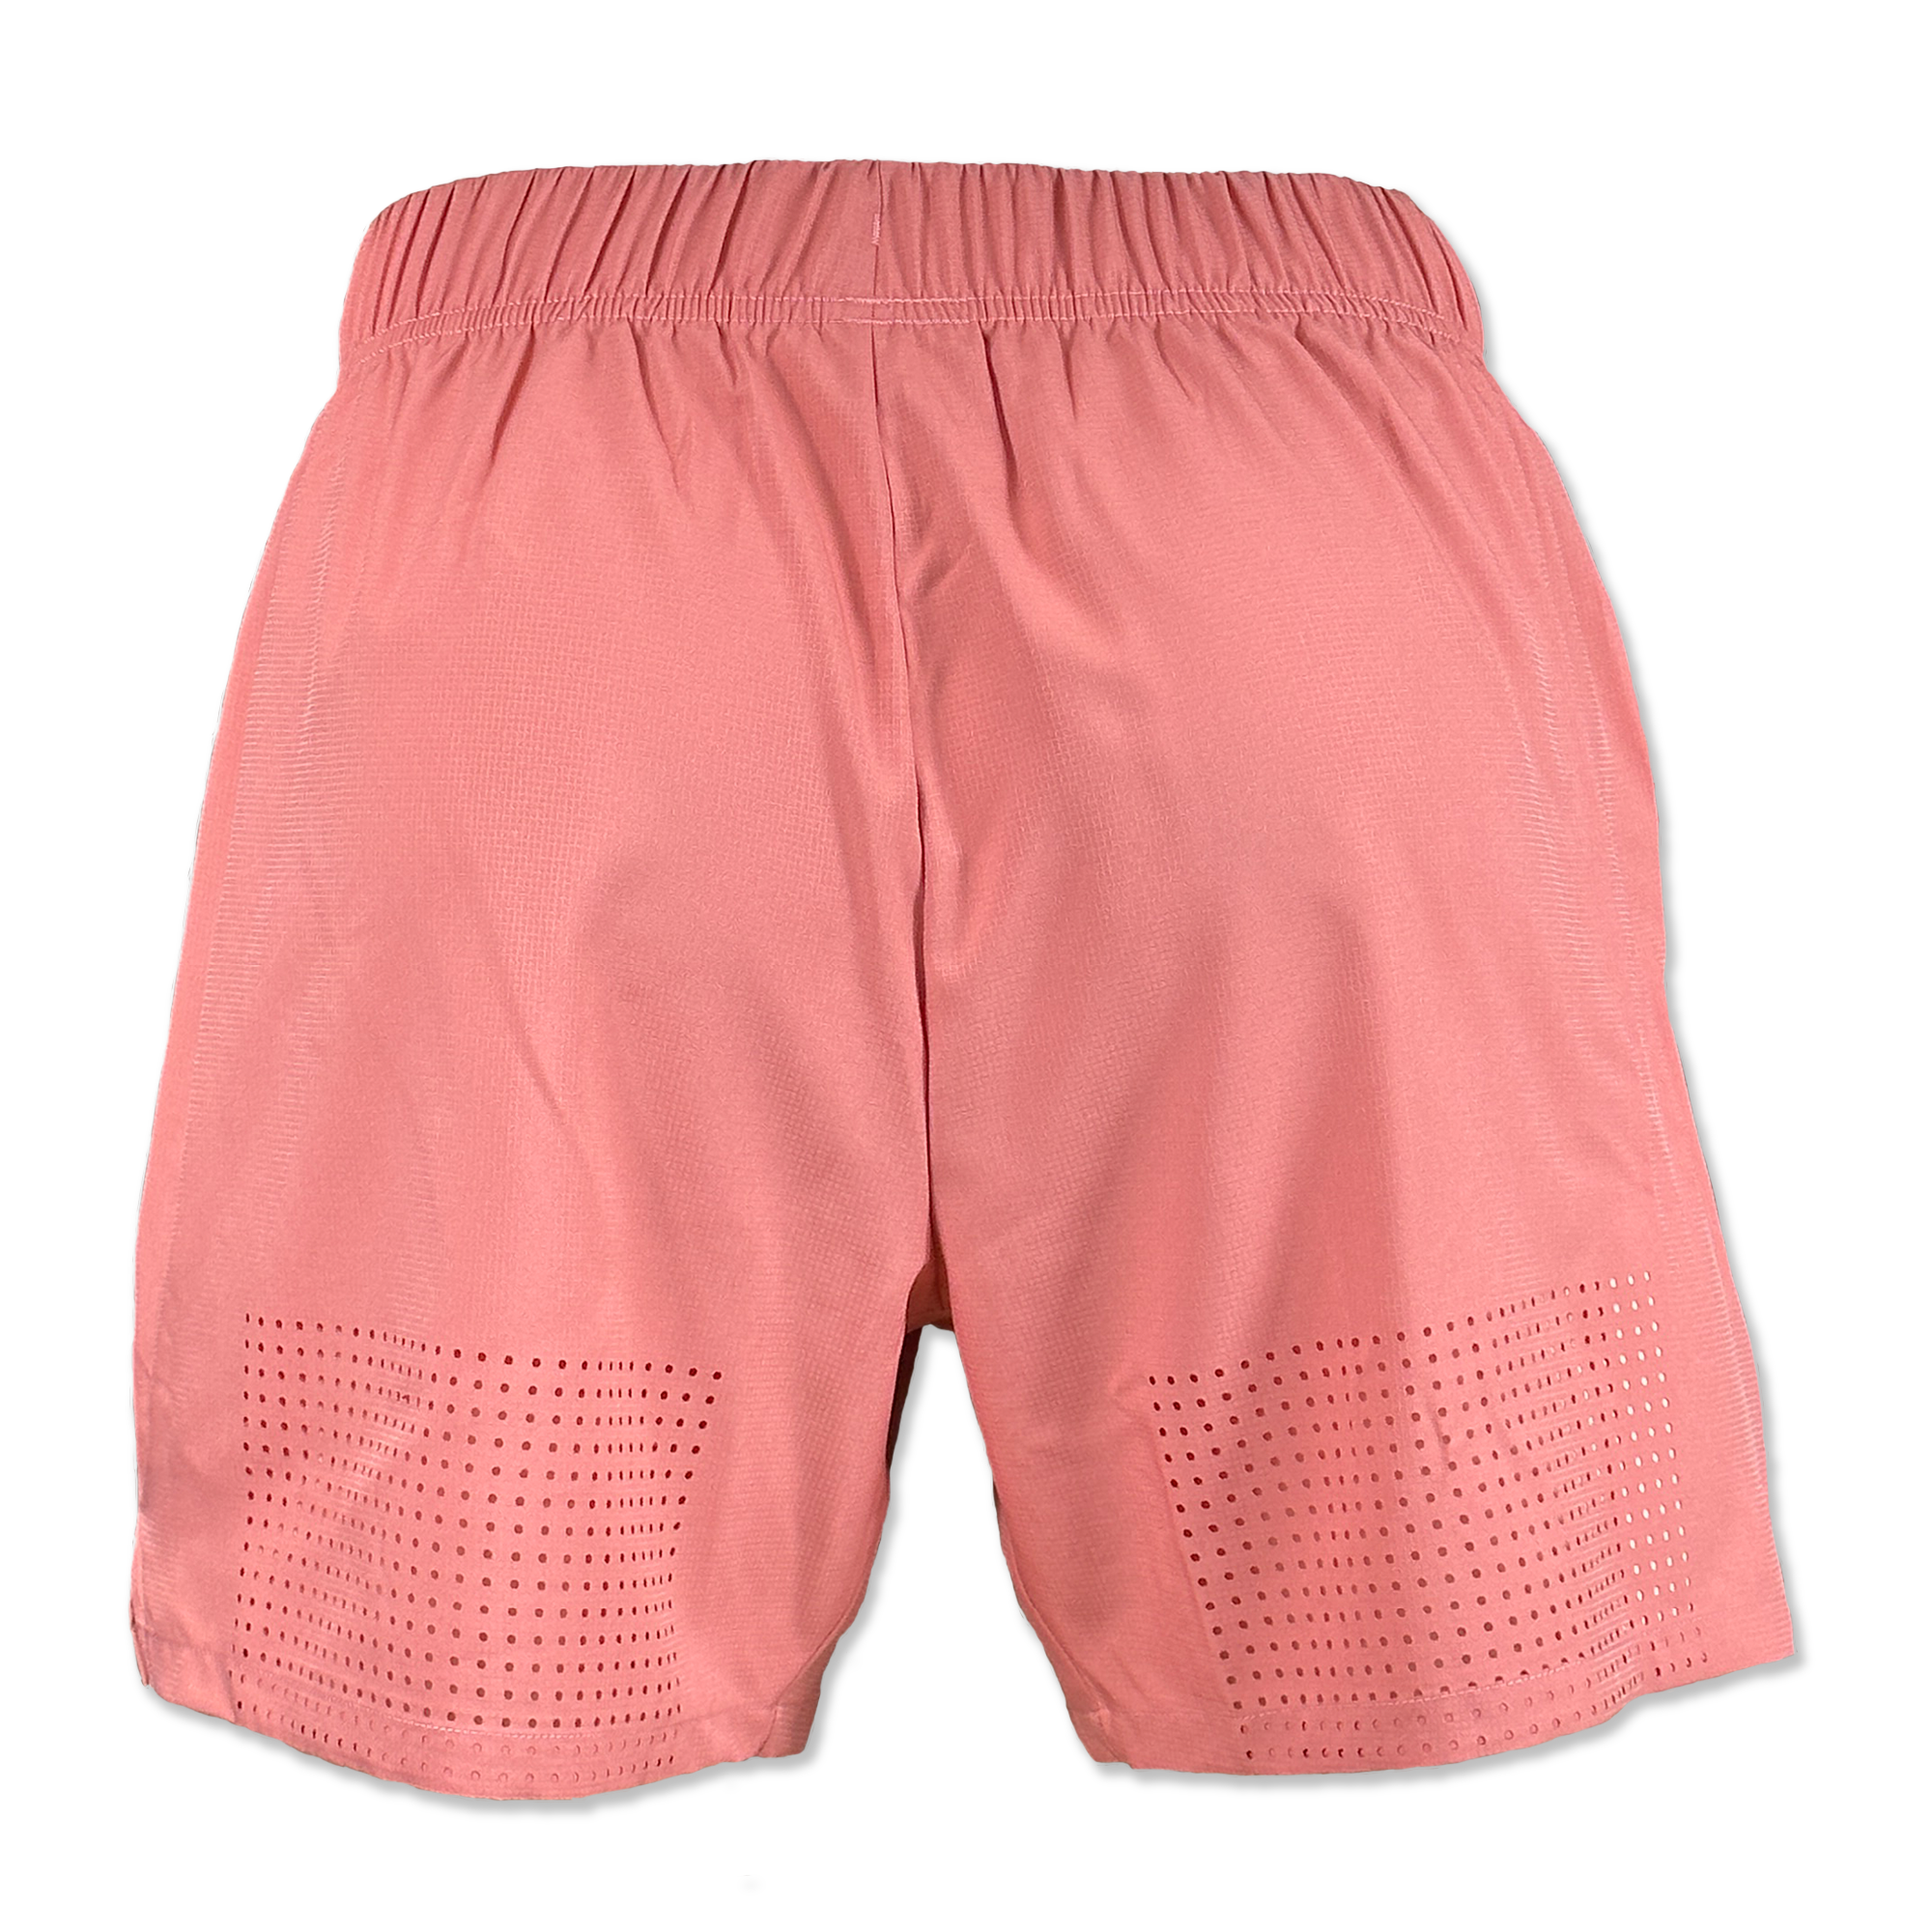 Men's Shorts - Competition 3.0 - Sunstone - Savage Barbell Apparel